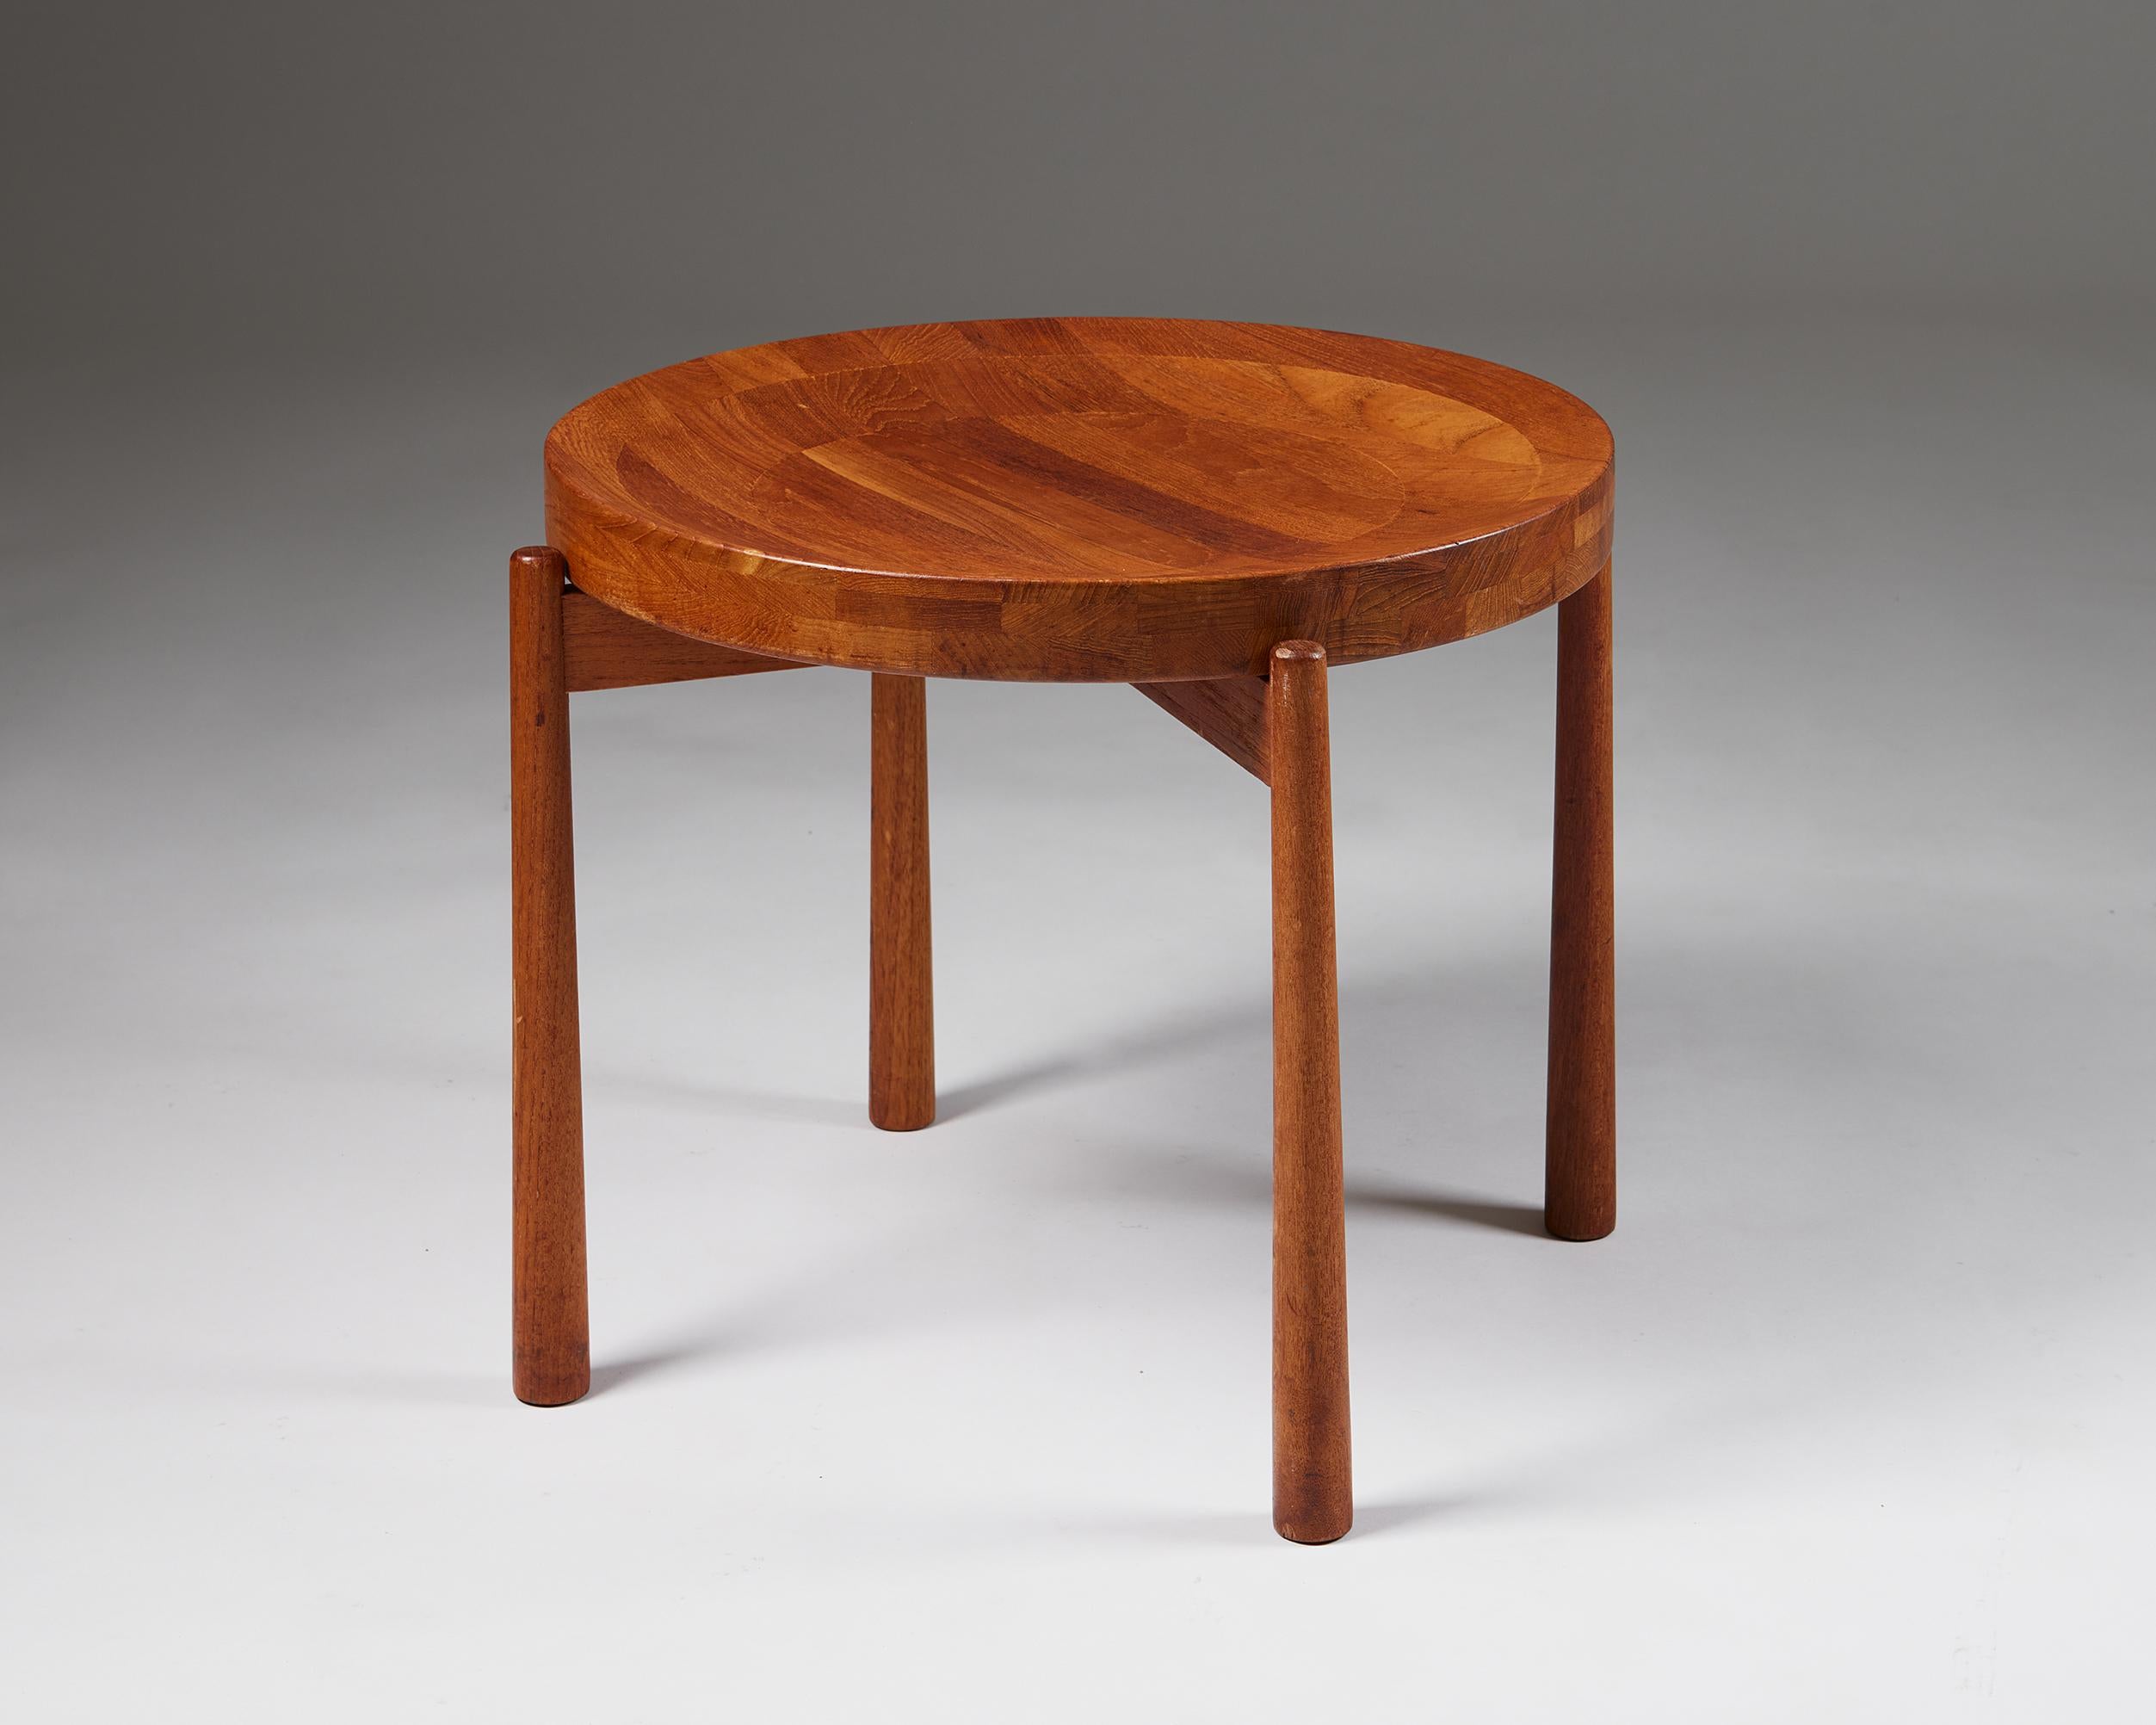 Side table designed by Jens Harald Quistgaard,
Denmark. 1950s.

Teak.

Exquisite woodwork and a beautifully shaped, removable tray surface that can function as a bowl characterise this Danish collectable. 

The sculptor Jens Harald Quistgaard worked